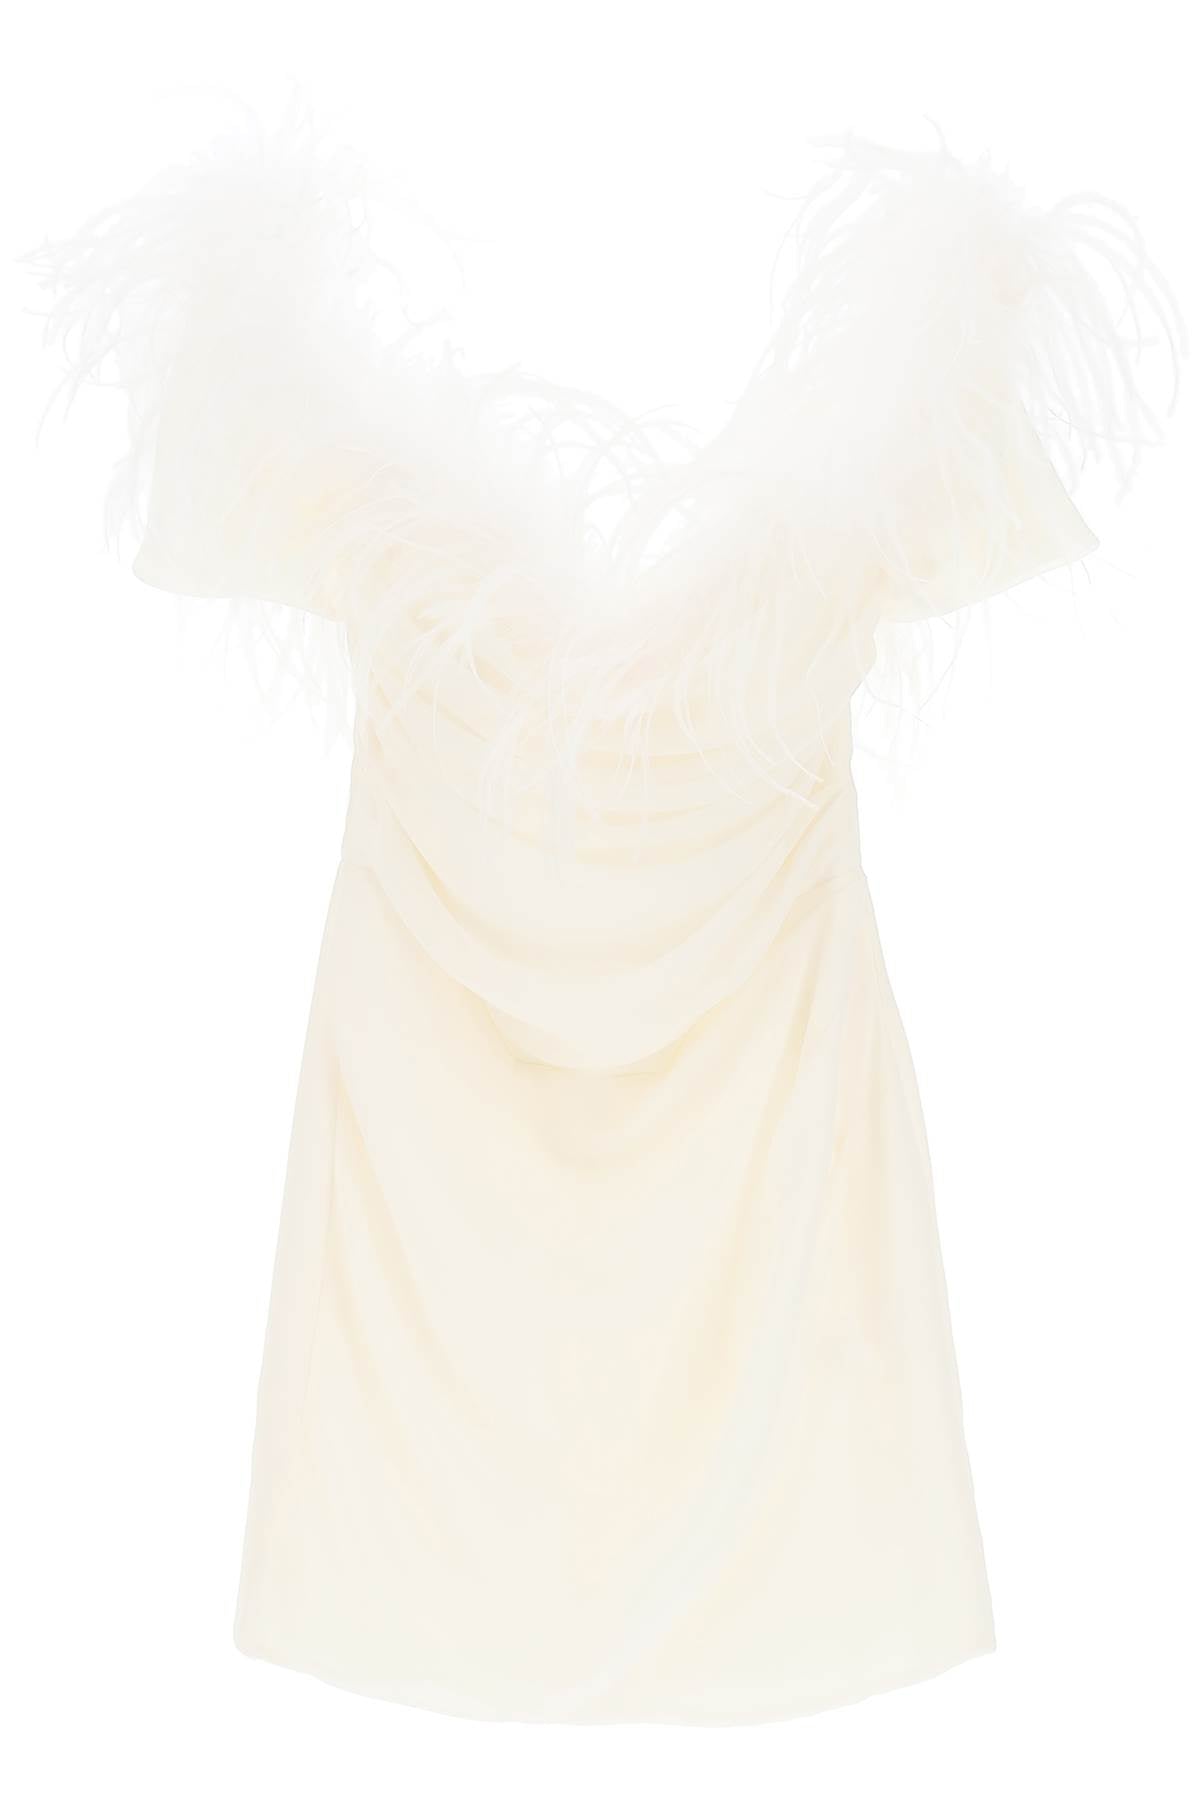 GIUSEPPE DI MORABITO Off-Shoulder Ostrich Feather Mini Dress for Women in White - SS23 Collection